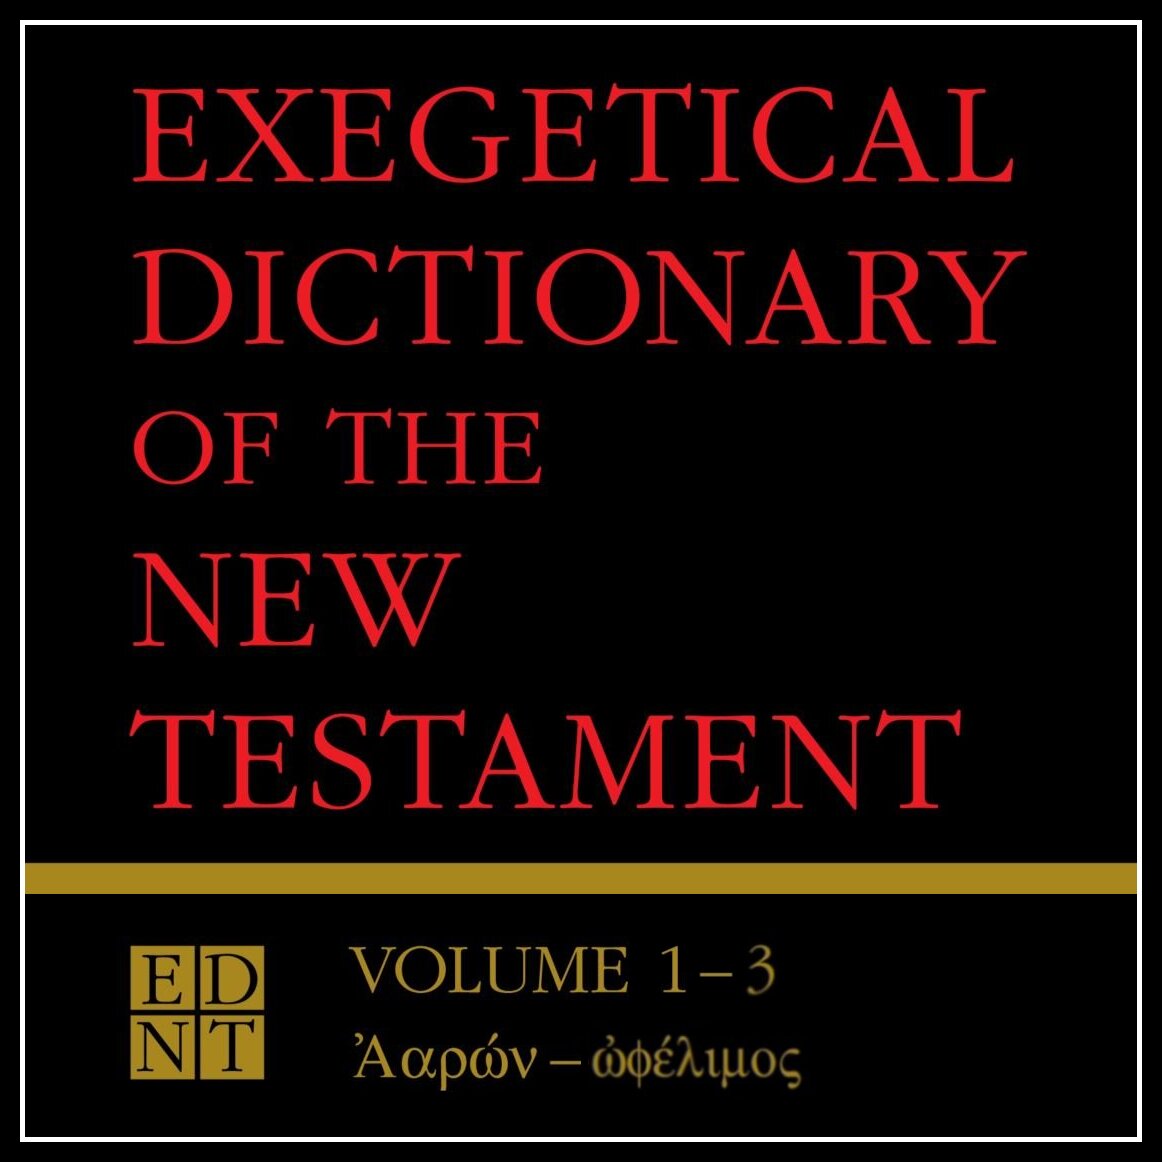 Exegetical Dictionary of the New Testament | EDNT (3 vols.)